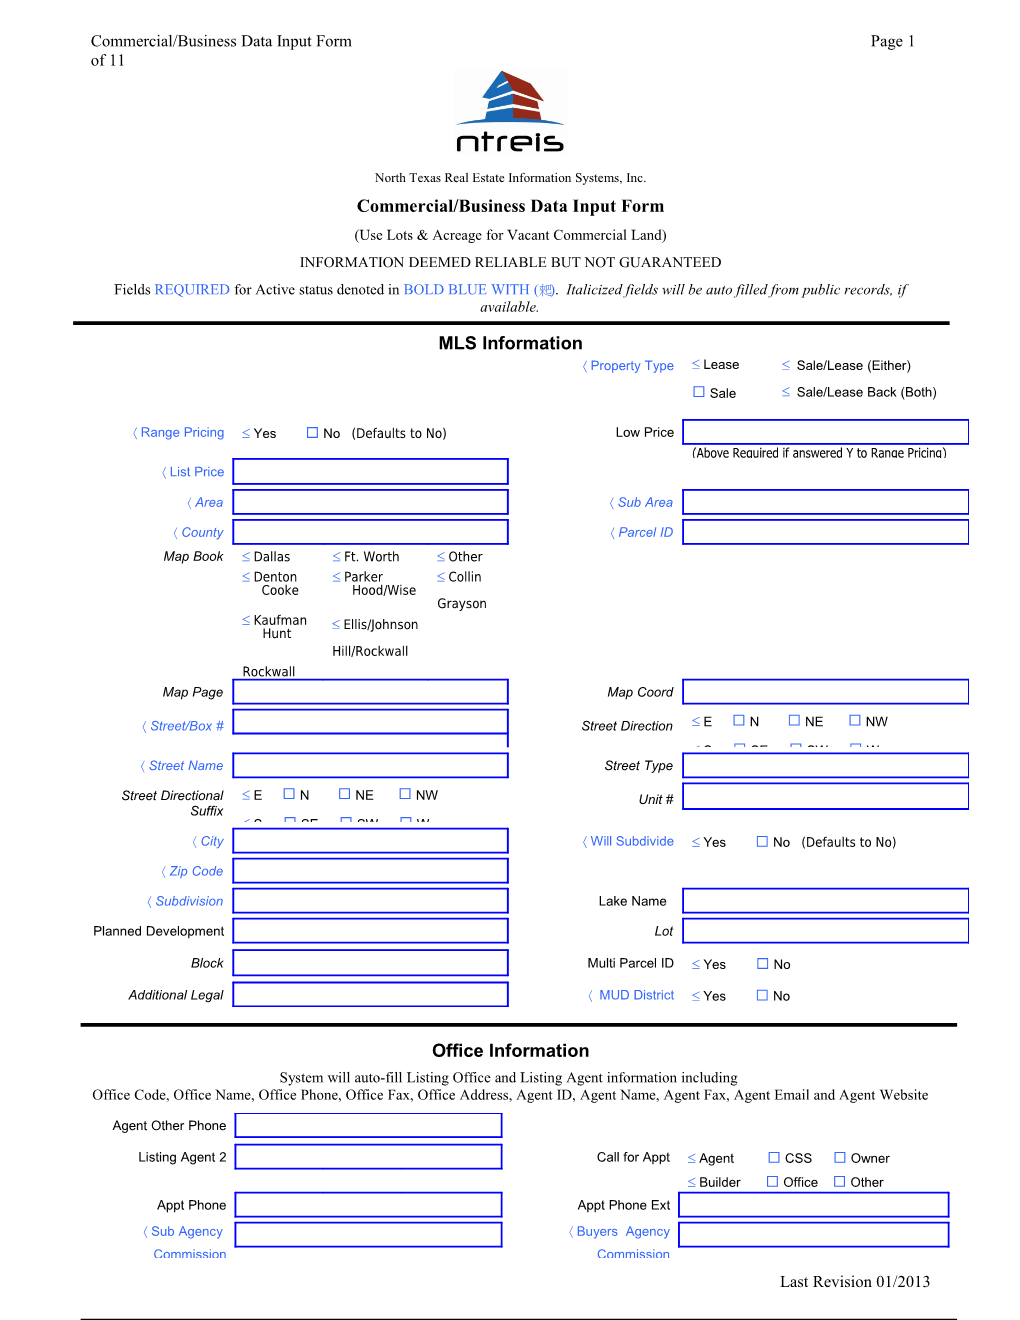 Commercial/Business Data Input Form Page 9 of 9